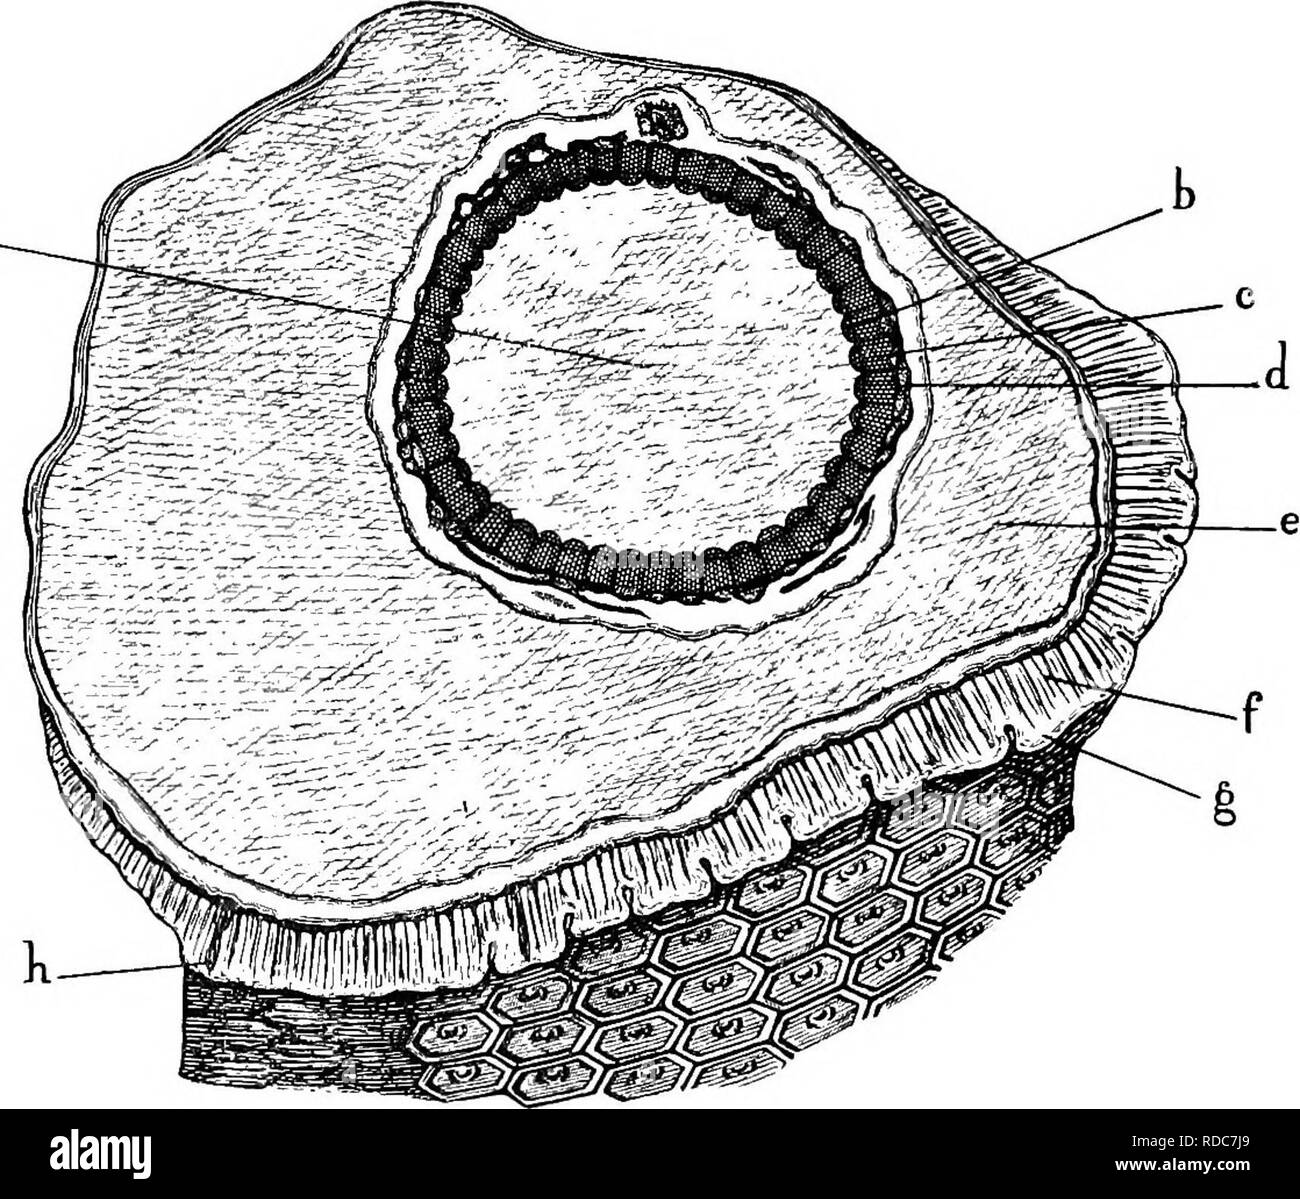 . Studies in fossil botany . Paleobotany. 2l6 STUDIES IN FOSSIL BOTANY the convex side towards the pith. The small, spiral tracheides are placed on the outer, slightly concave, side of each bundle. The rest of the primary xylem- elements, which are irregularly arranged, and increase. Fig. 89.—Sigillaria Menardi (Clathraria type). Brongniart's original specimen, show- ing transverse section and part of surface with leaf-scars, a, pith (perished) ; b, primary wood, forming many distinct bundles ; c, secondary wood ; d, phloem-zone ; e, middle cortex (perished) ; /, periderm ; g, leaf-base ; k, f Stock Photo